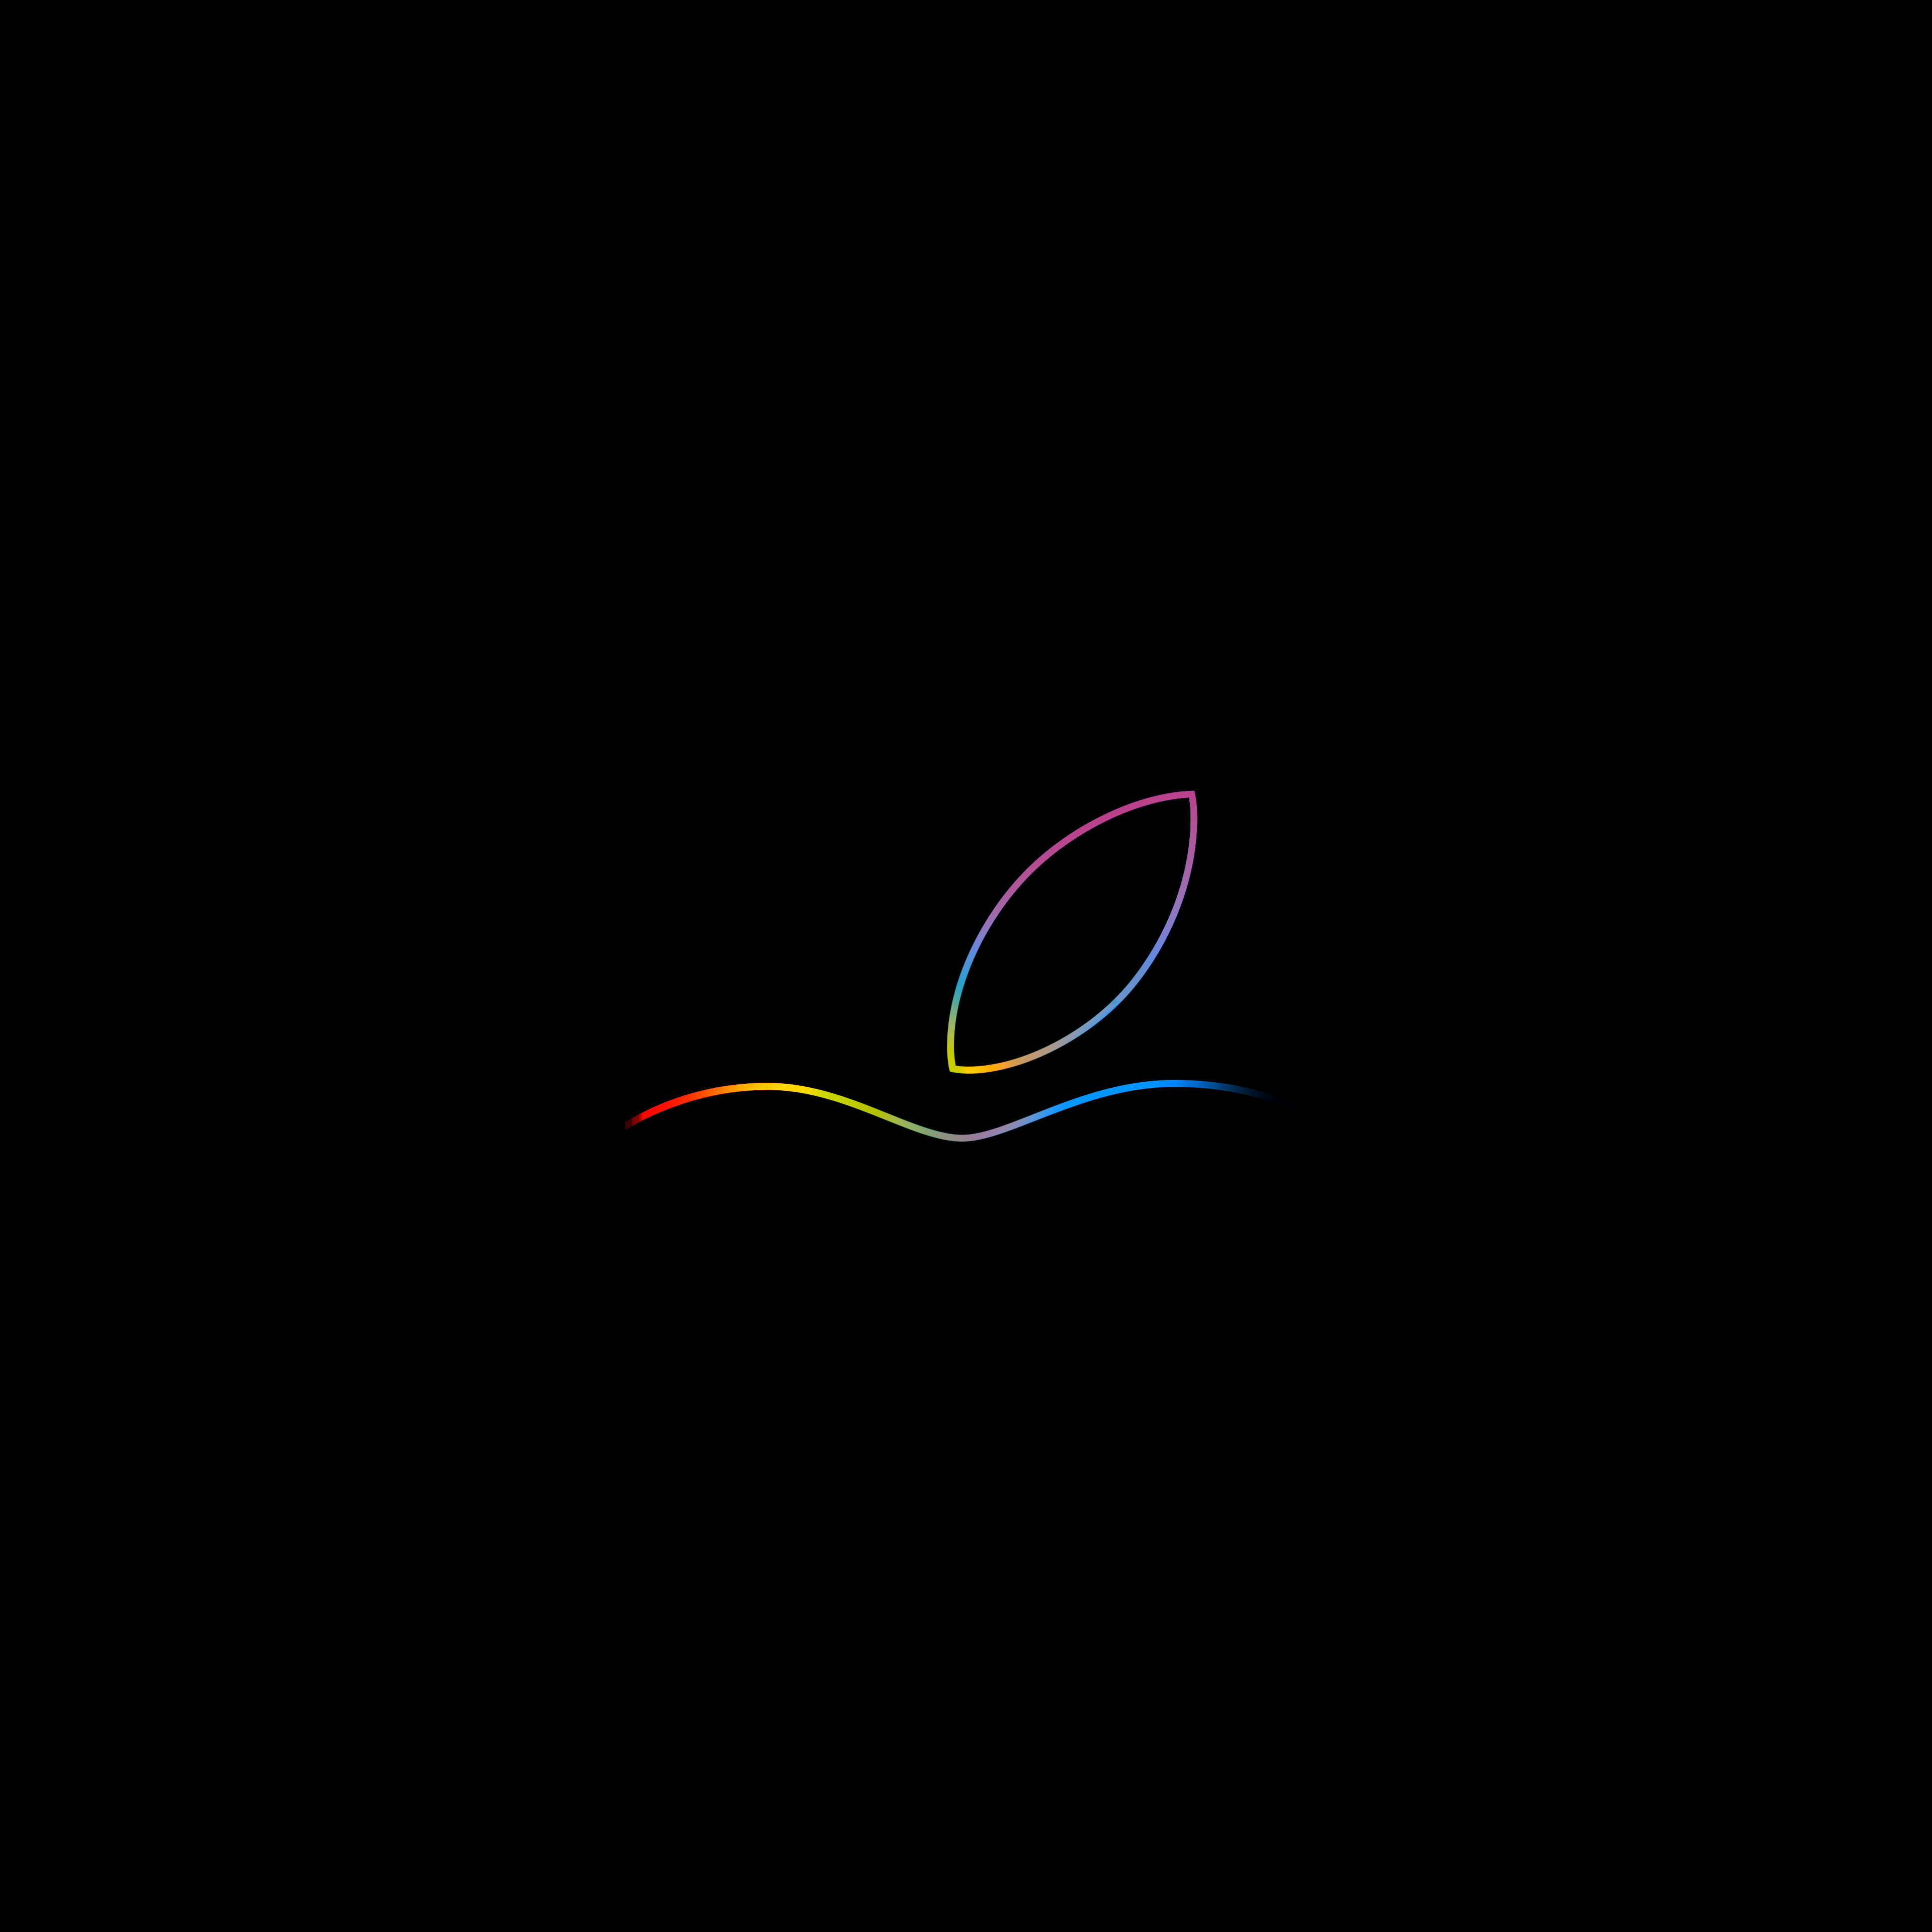 Another Apple Event Wallpaperbirchtree.me